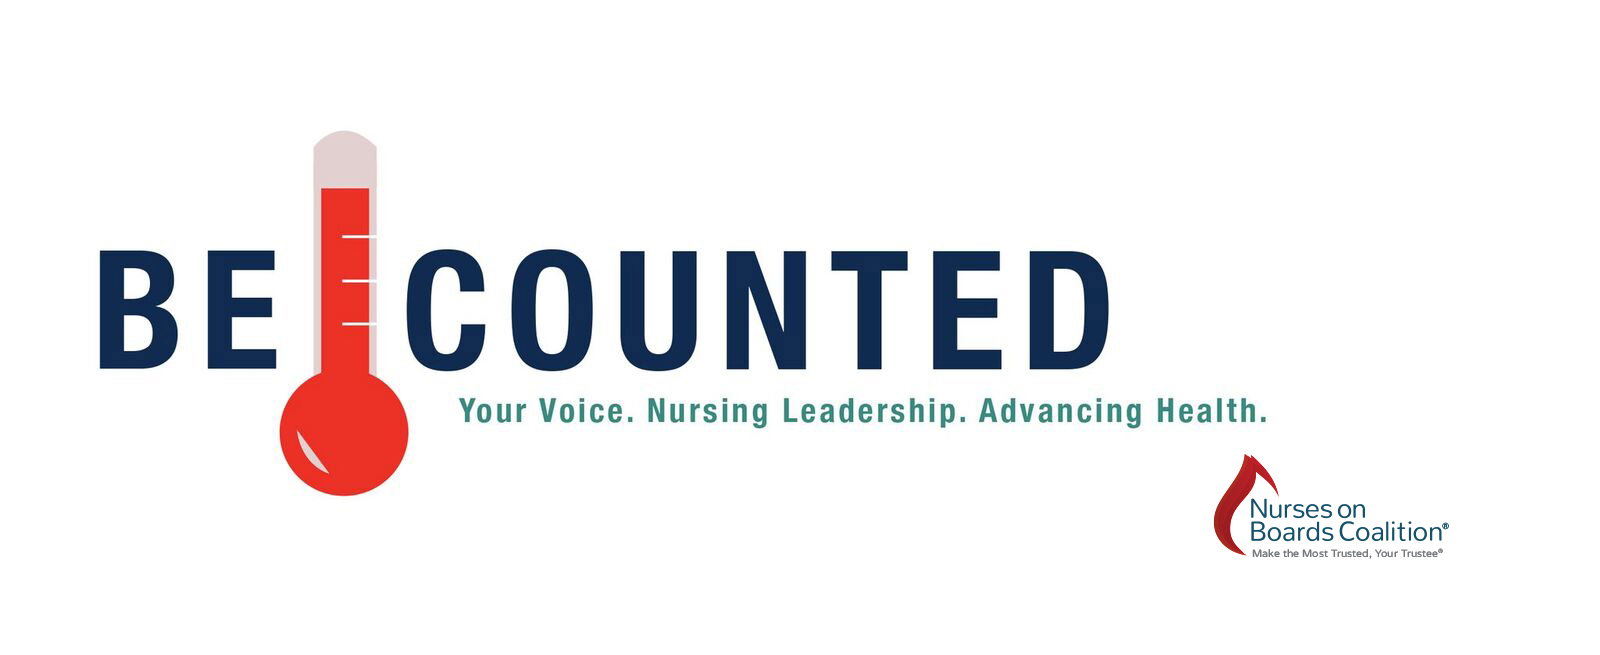 Be Counted. Your Voice. Nursing Leadership. Advancing Health.